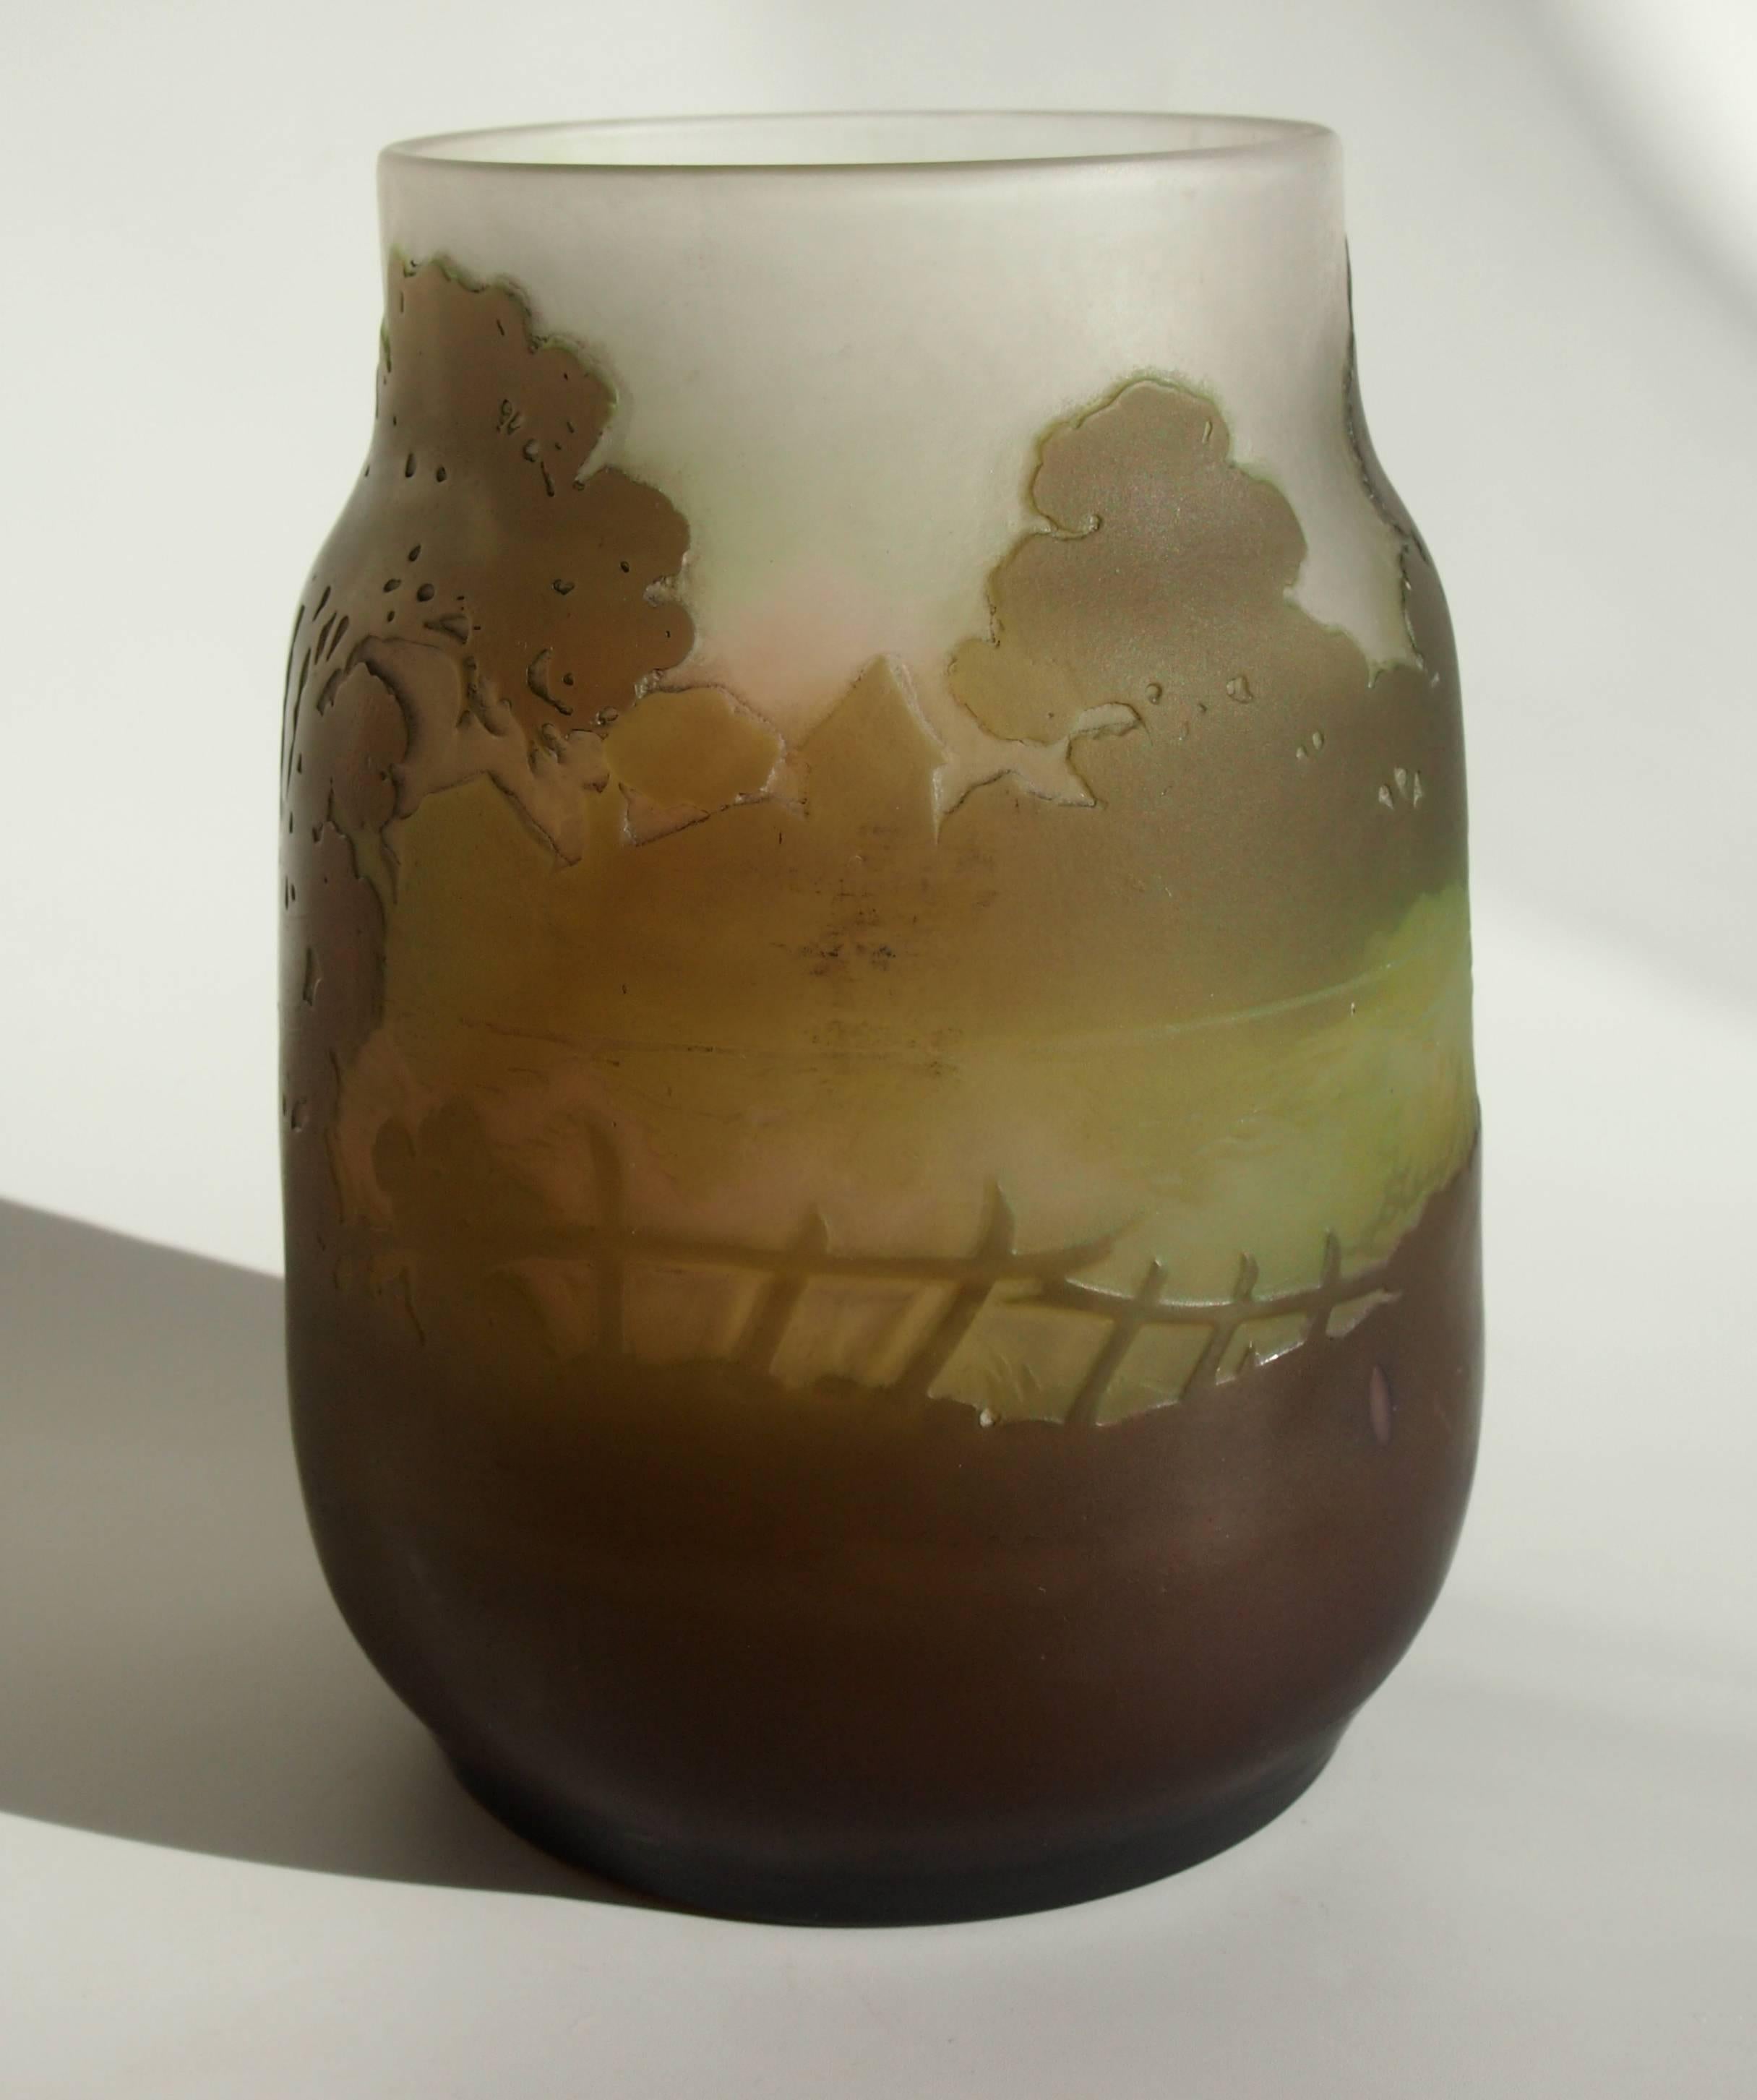 Exceptional Art Nouveau Emile Galle Cameo landscape vase, depicting a very early morning waterside scene, with outline trees, buildings and shrubs, with swirling mists over a flowing river and little ramshackle fences. Signed in cameo (picture 5).